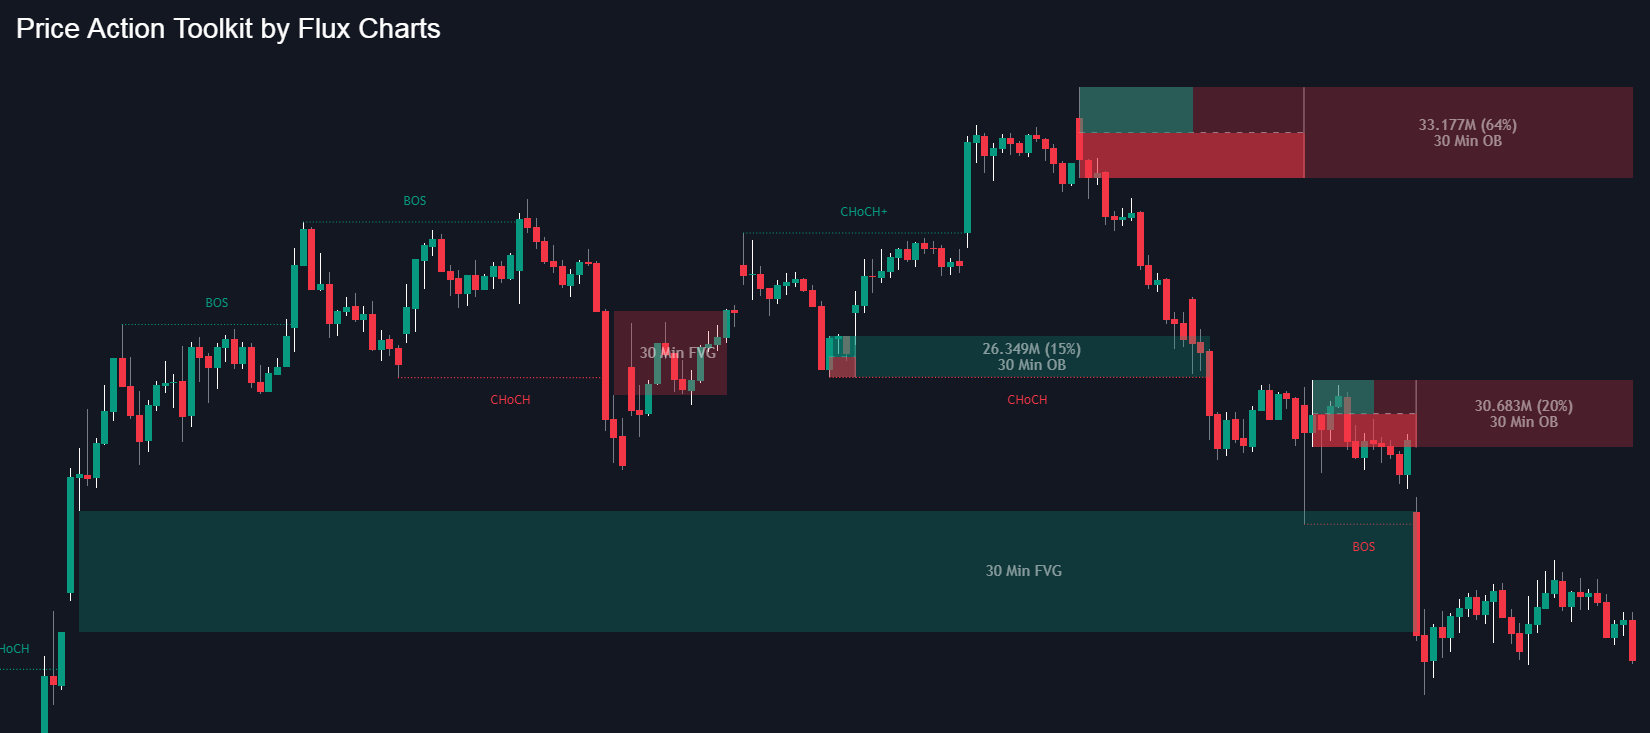 Price Action Toolkit by Flux Charts